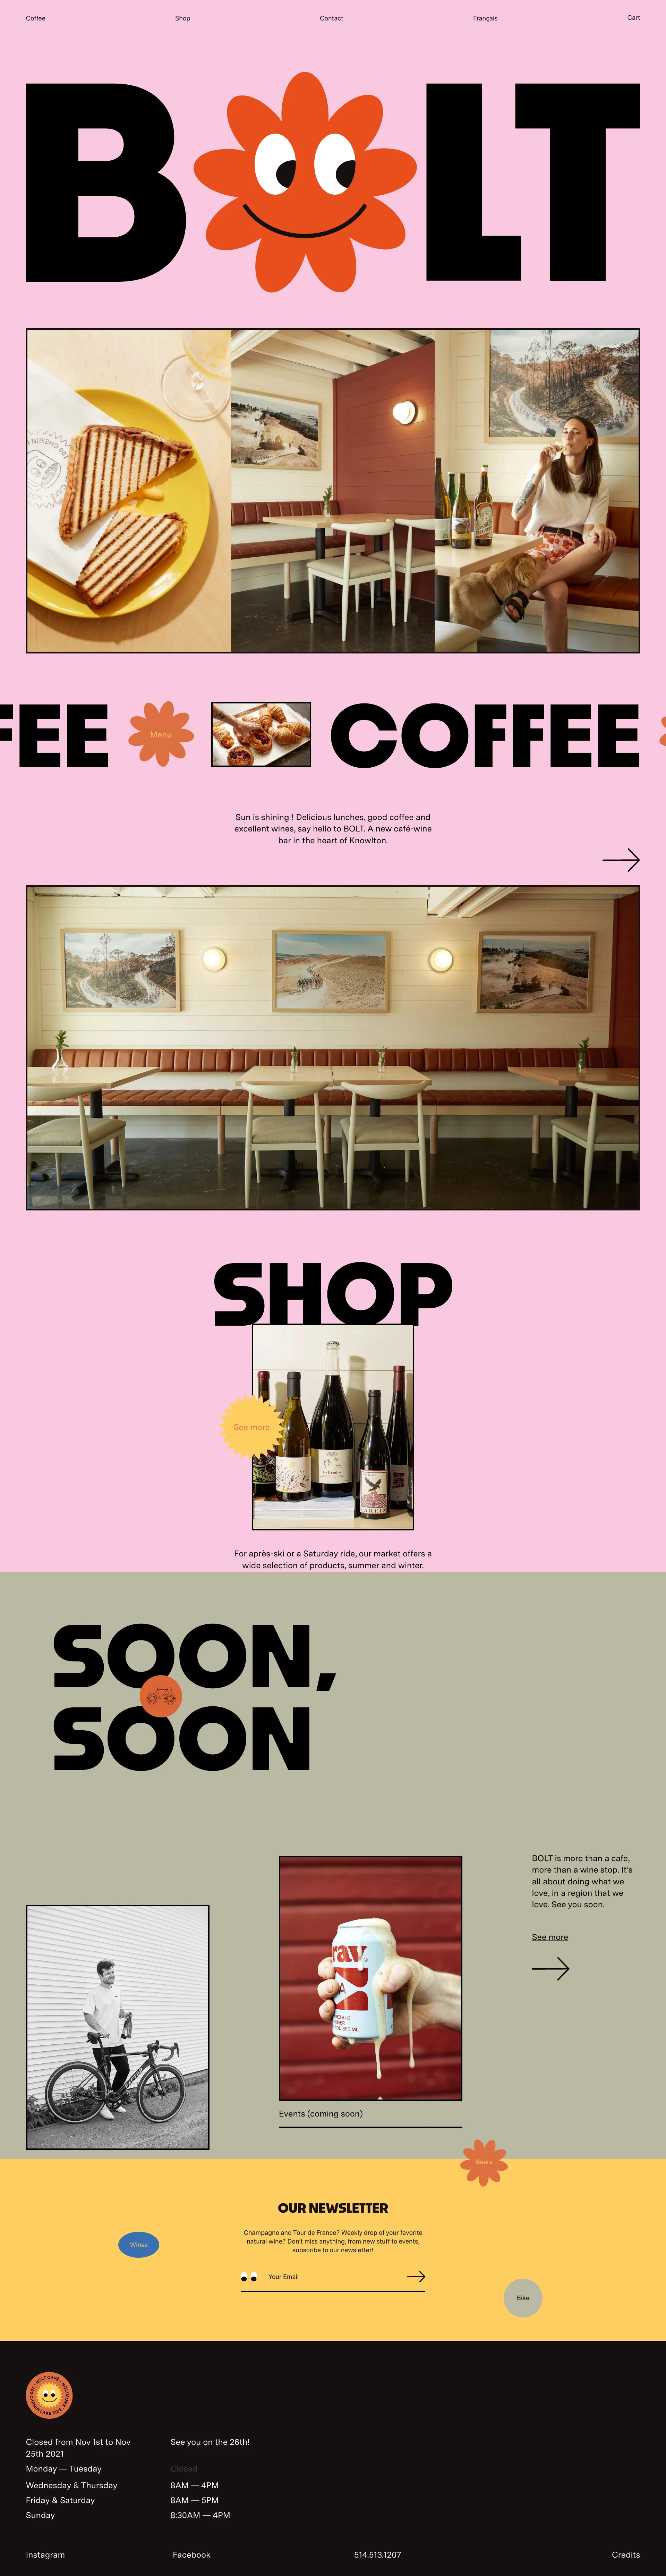 Bolt Café Landing Page Example: Sun is shining ! Delicious lunches, good coffee and excellent wines, say hello to BOLT. A new café-wine bar in the heart of Knowlton.